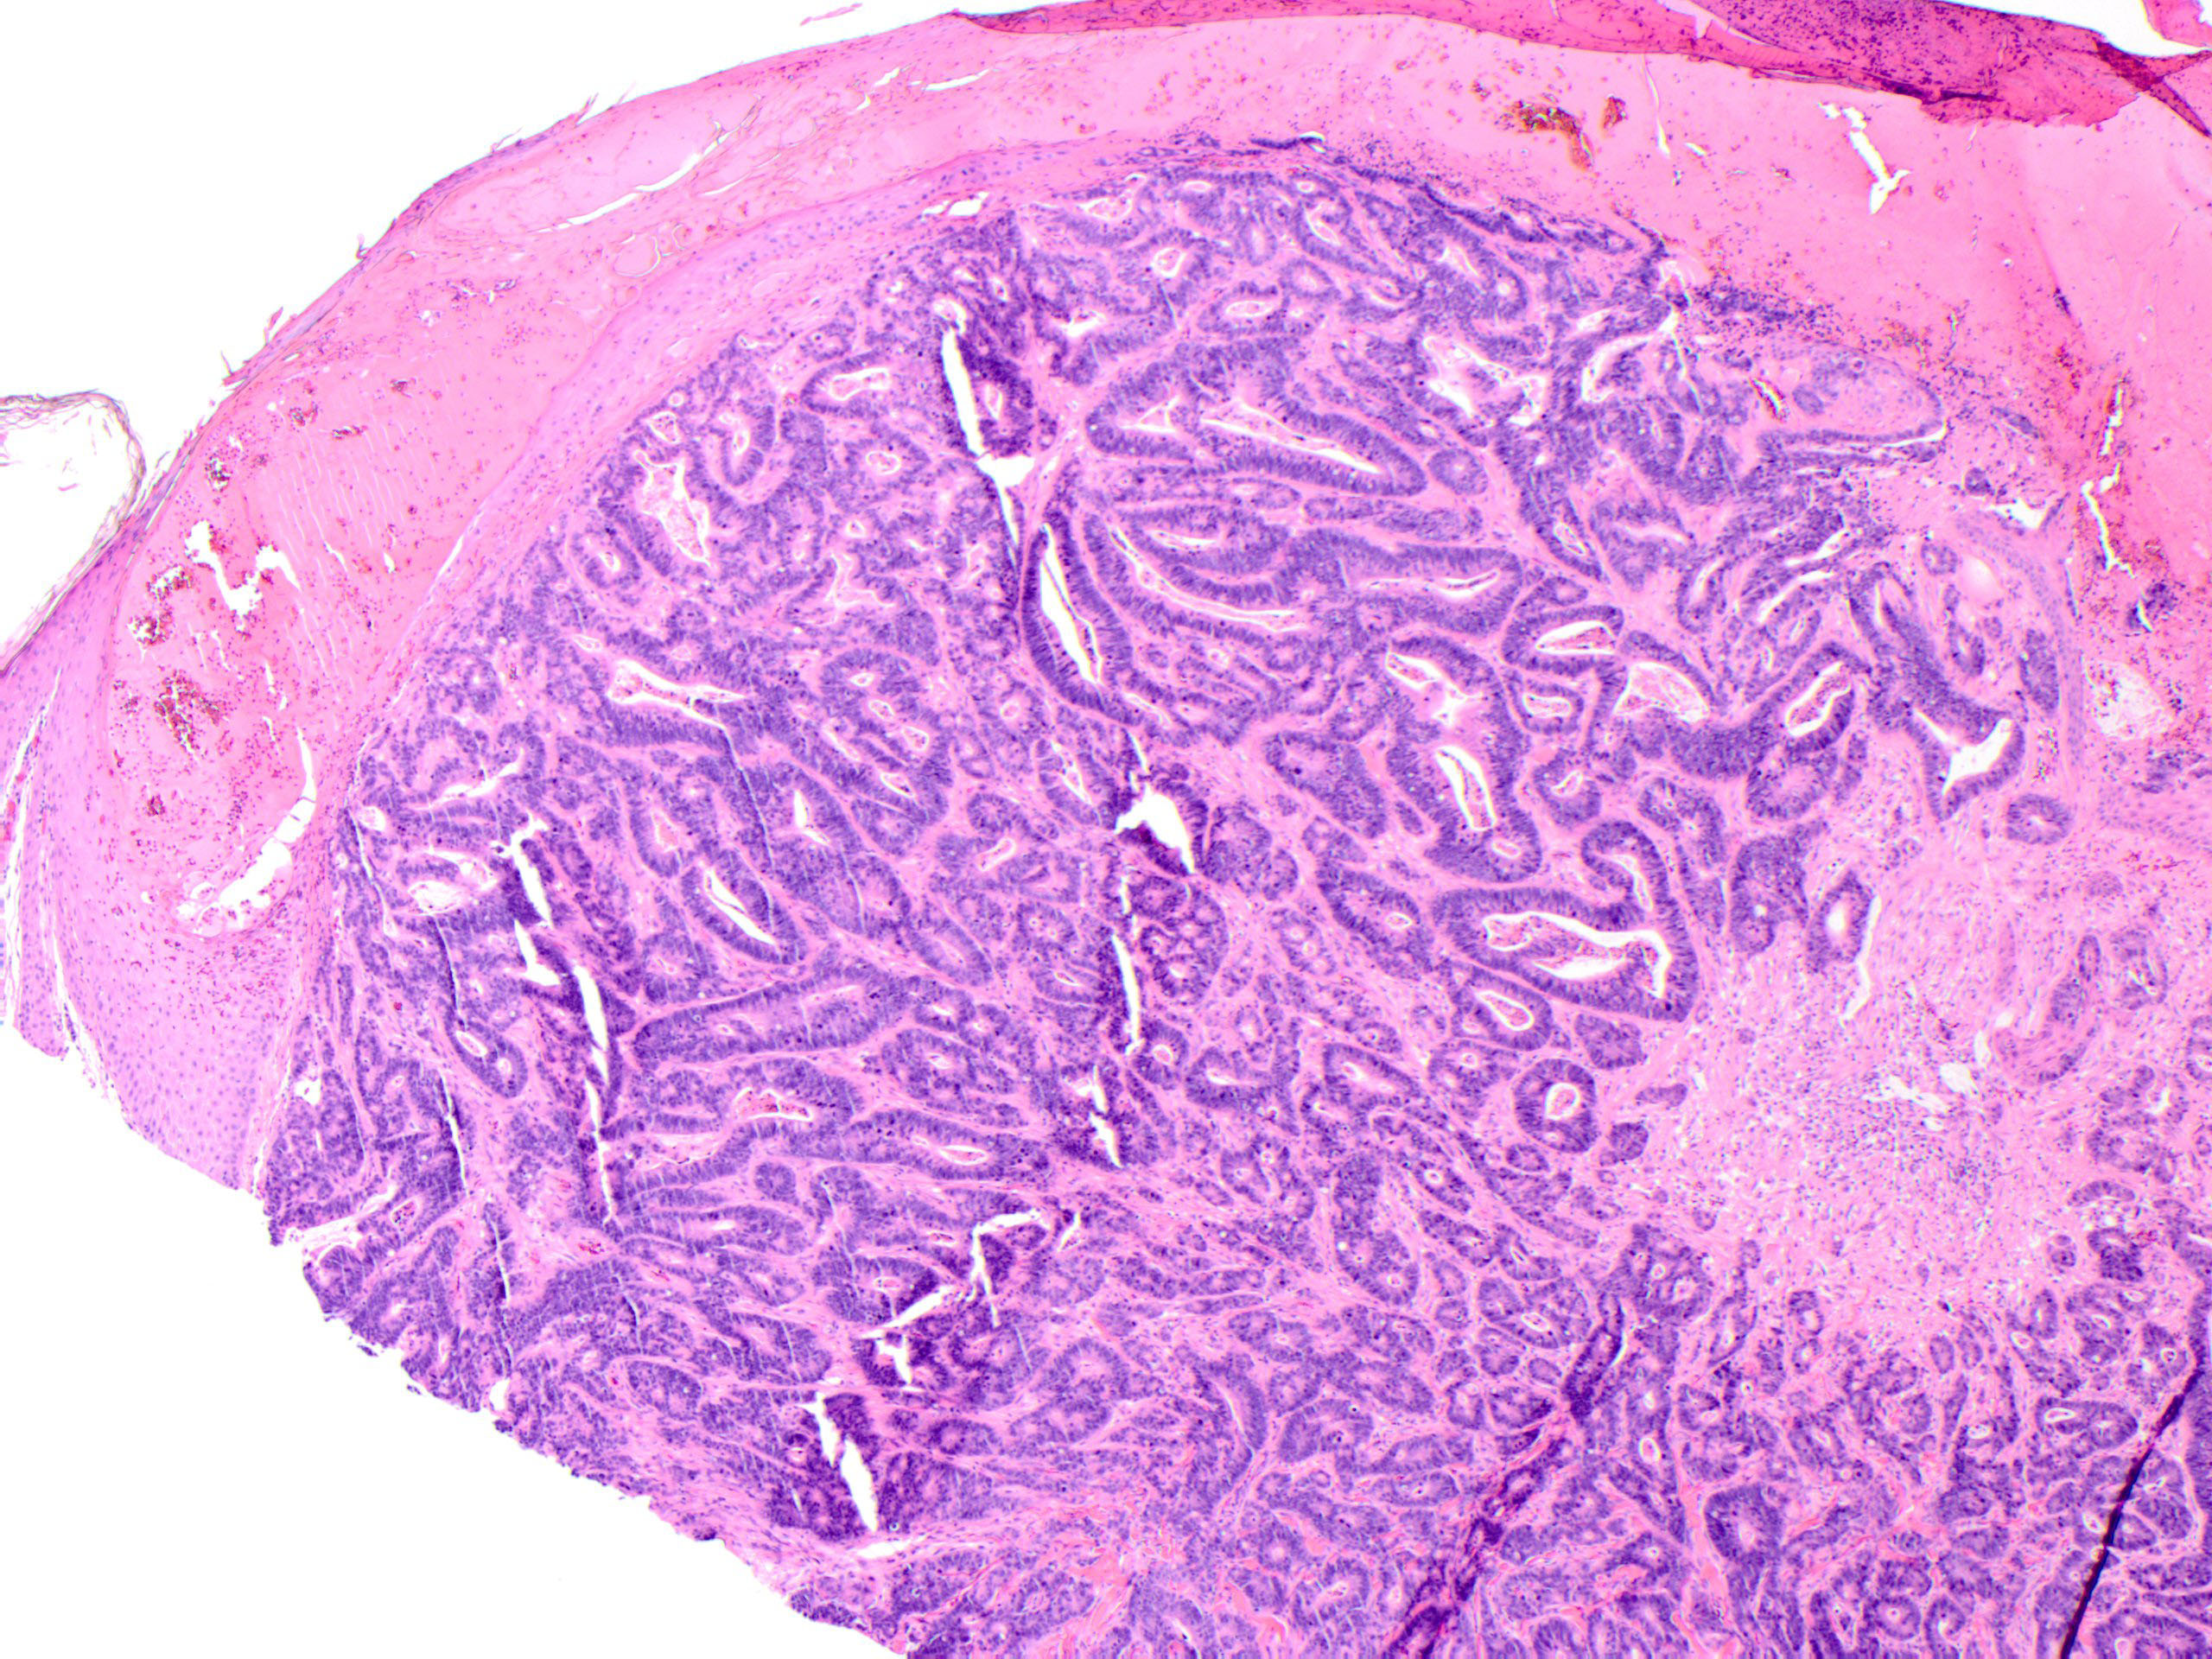 Figure 2: Cutaneous lesion biopsy, 40x magnification.